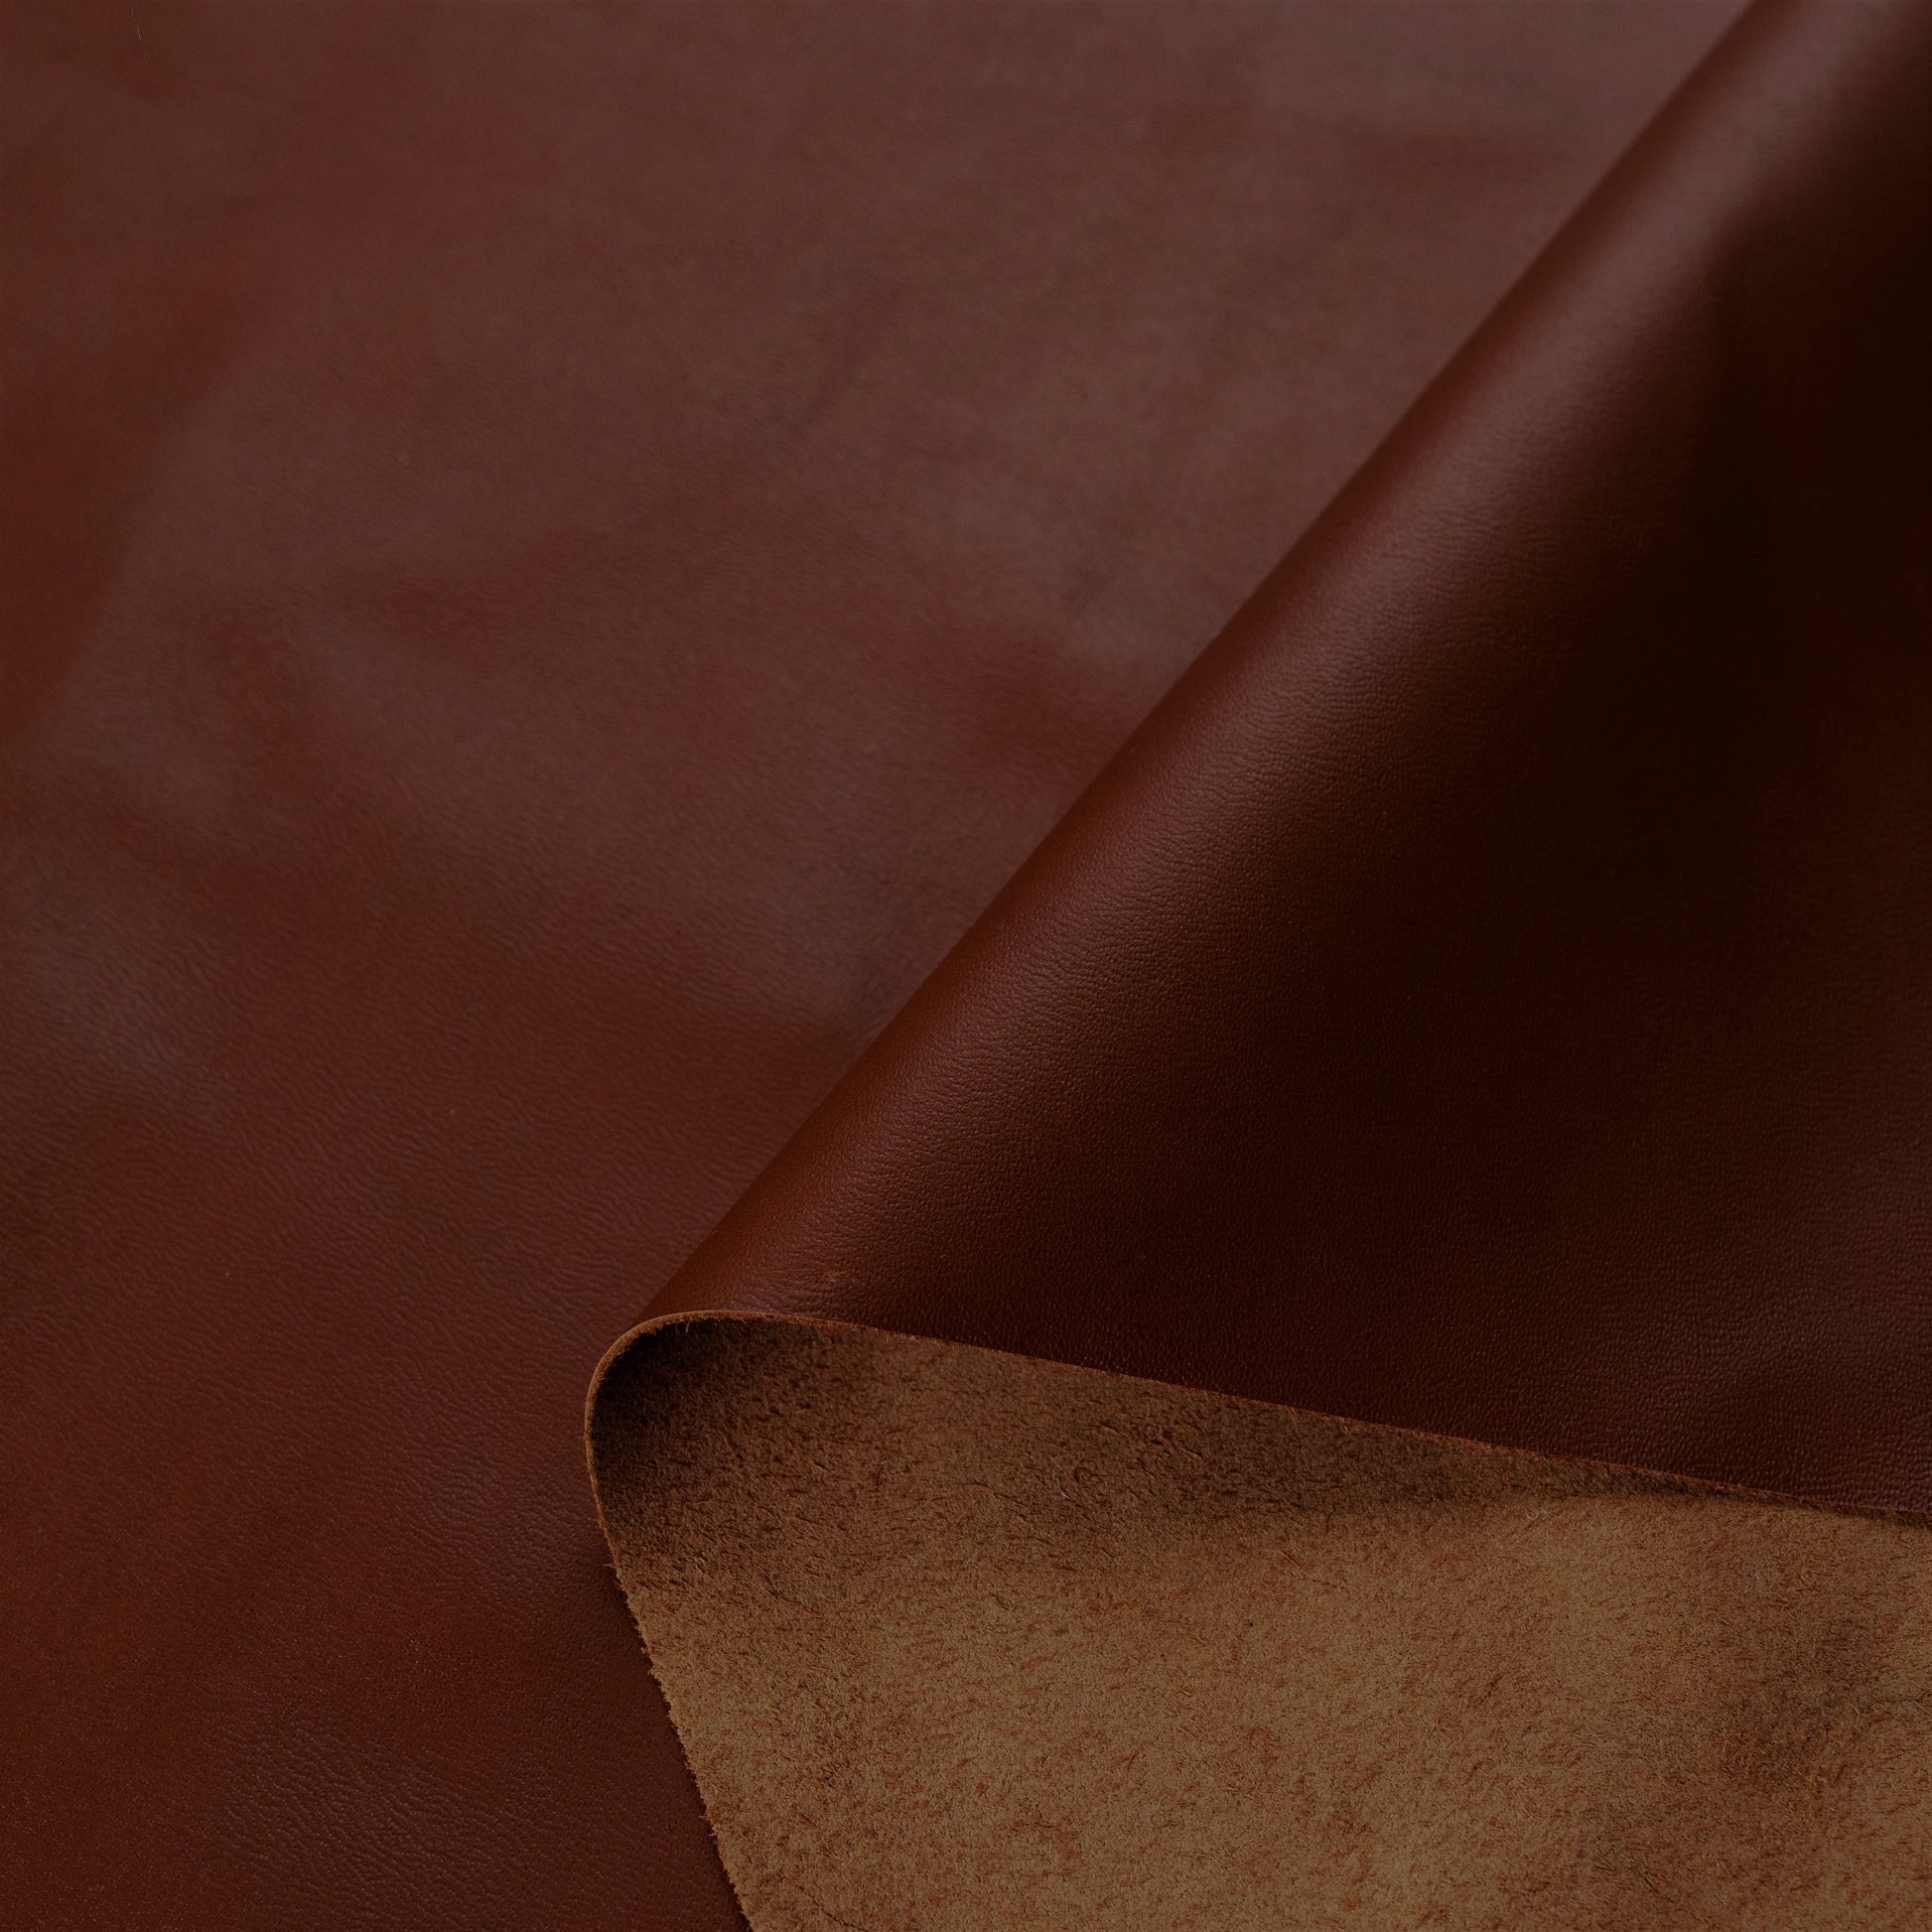 Cow Leather - Brown (Mahogany)